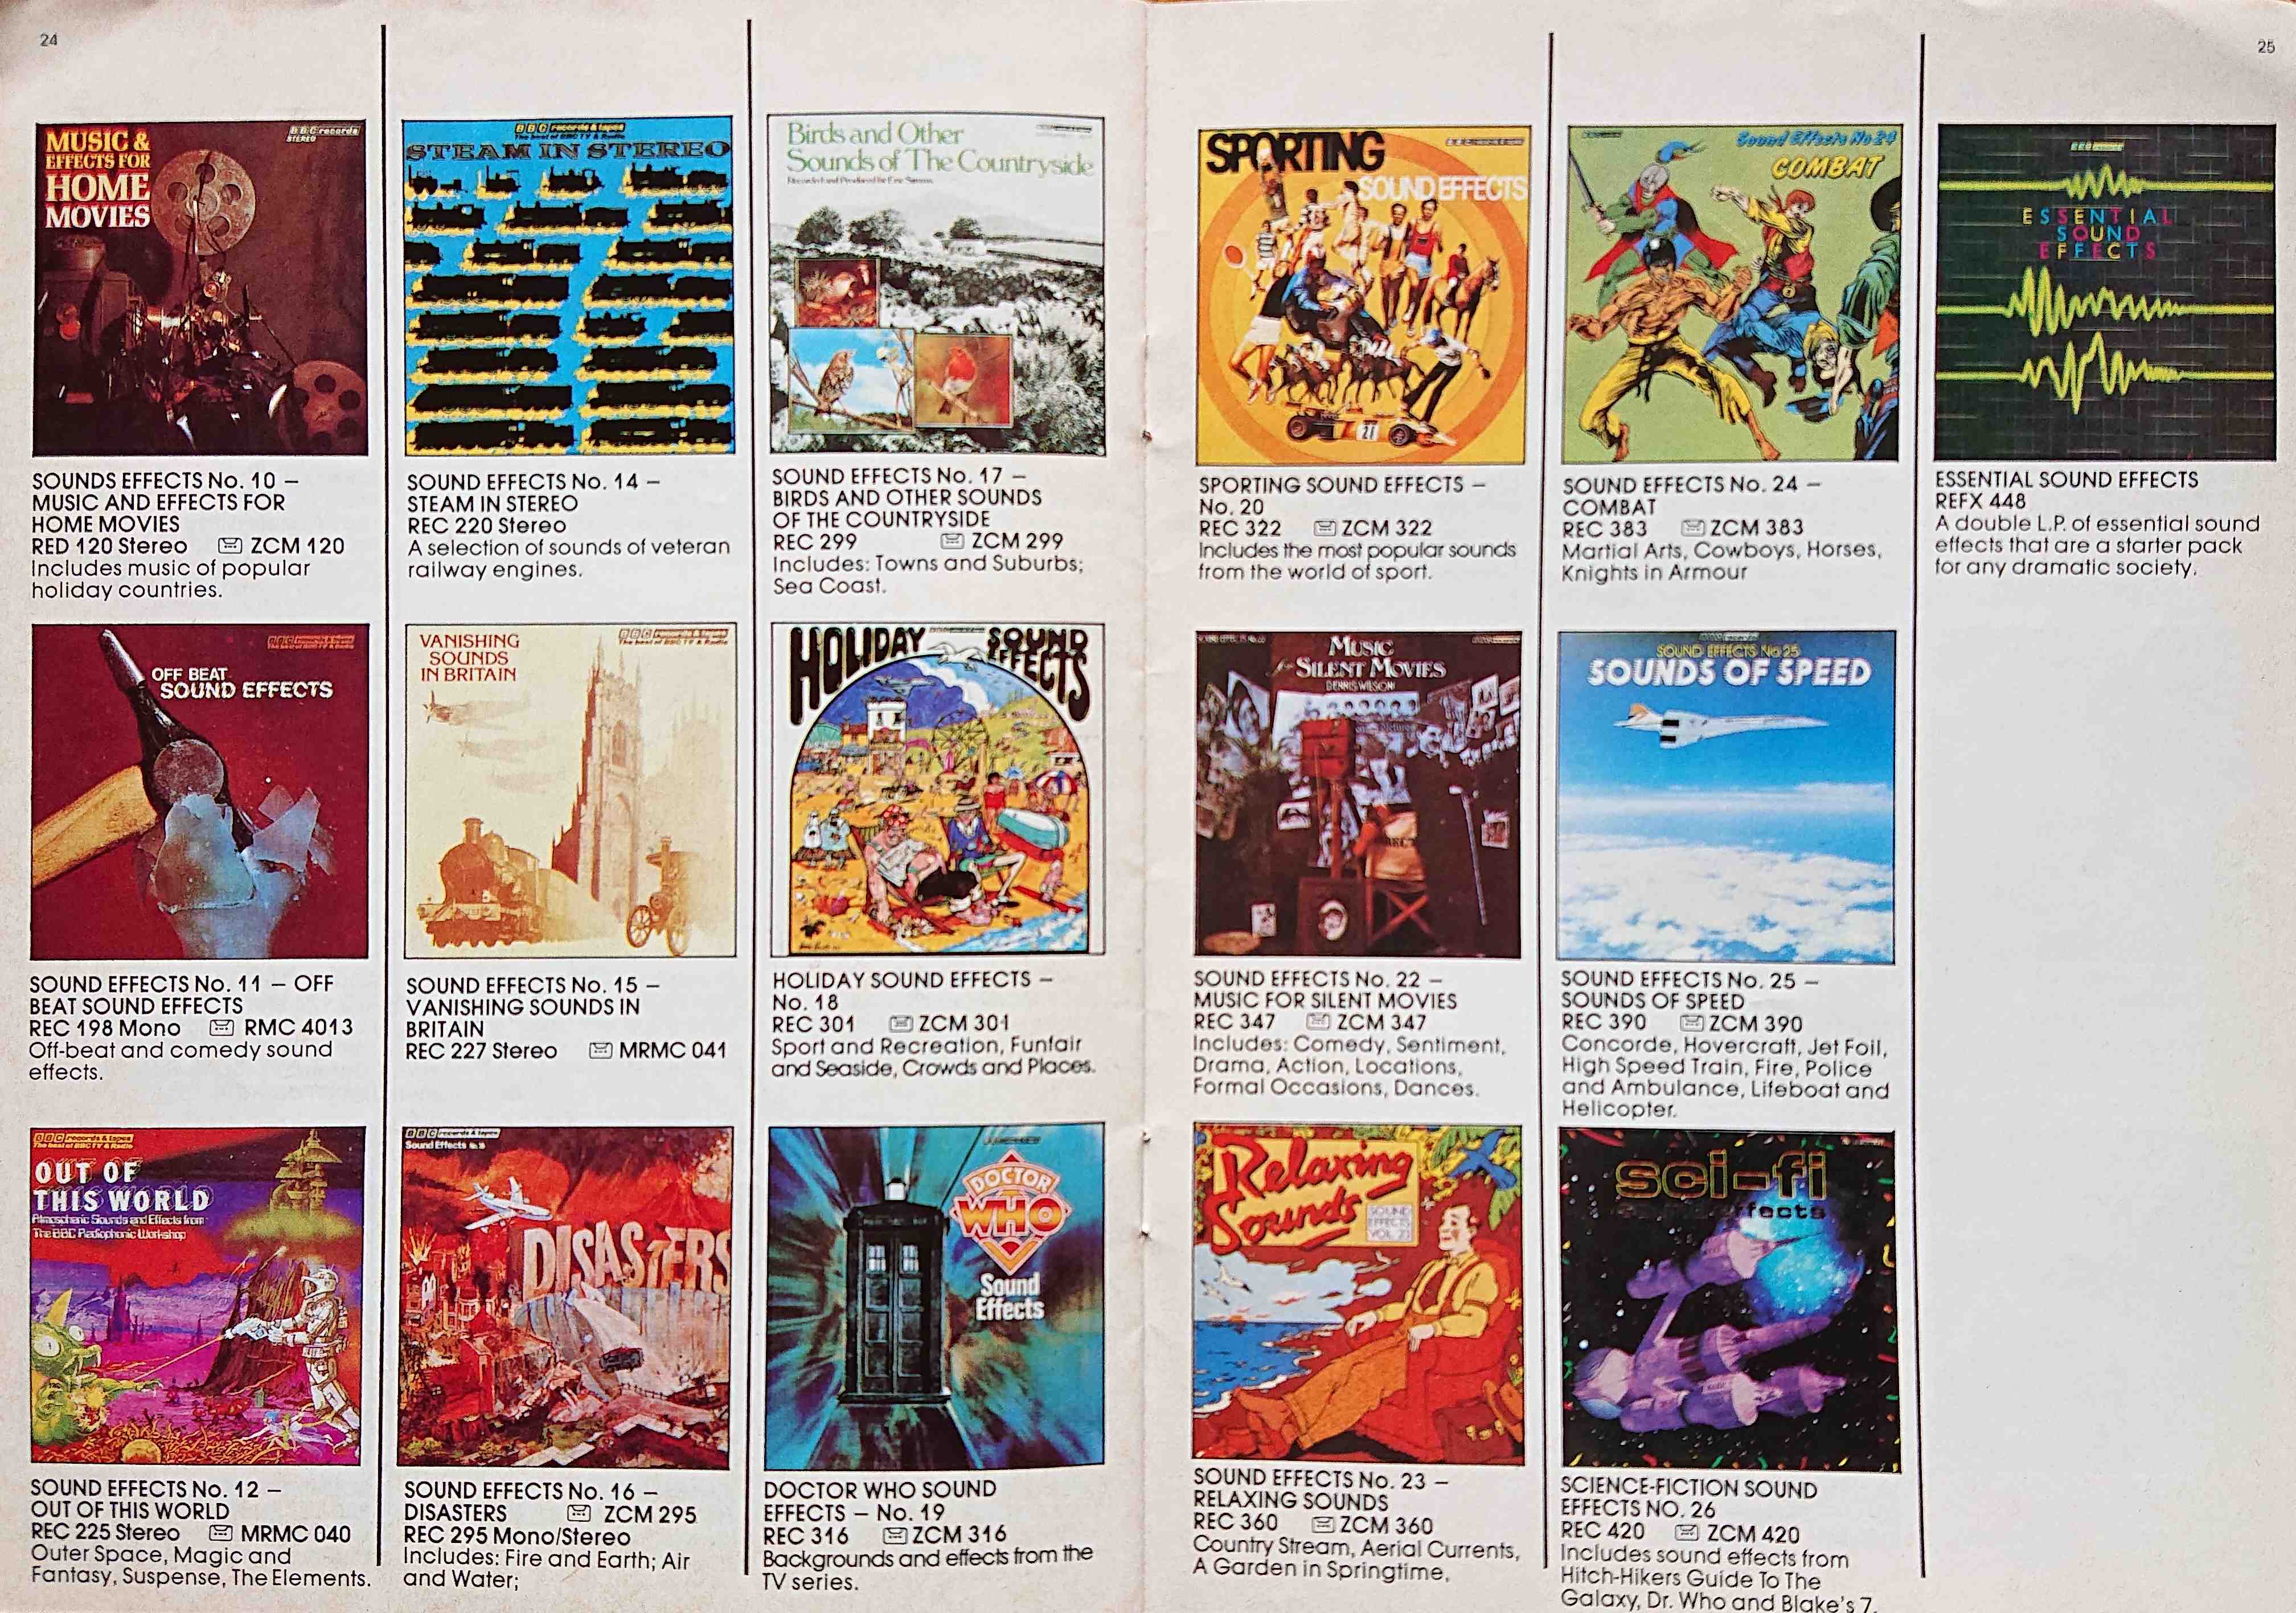 Other pages of catalogue BBC Records catalogue 1981